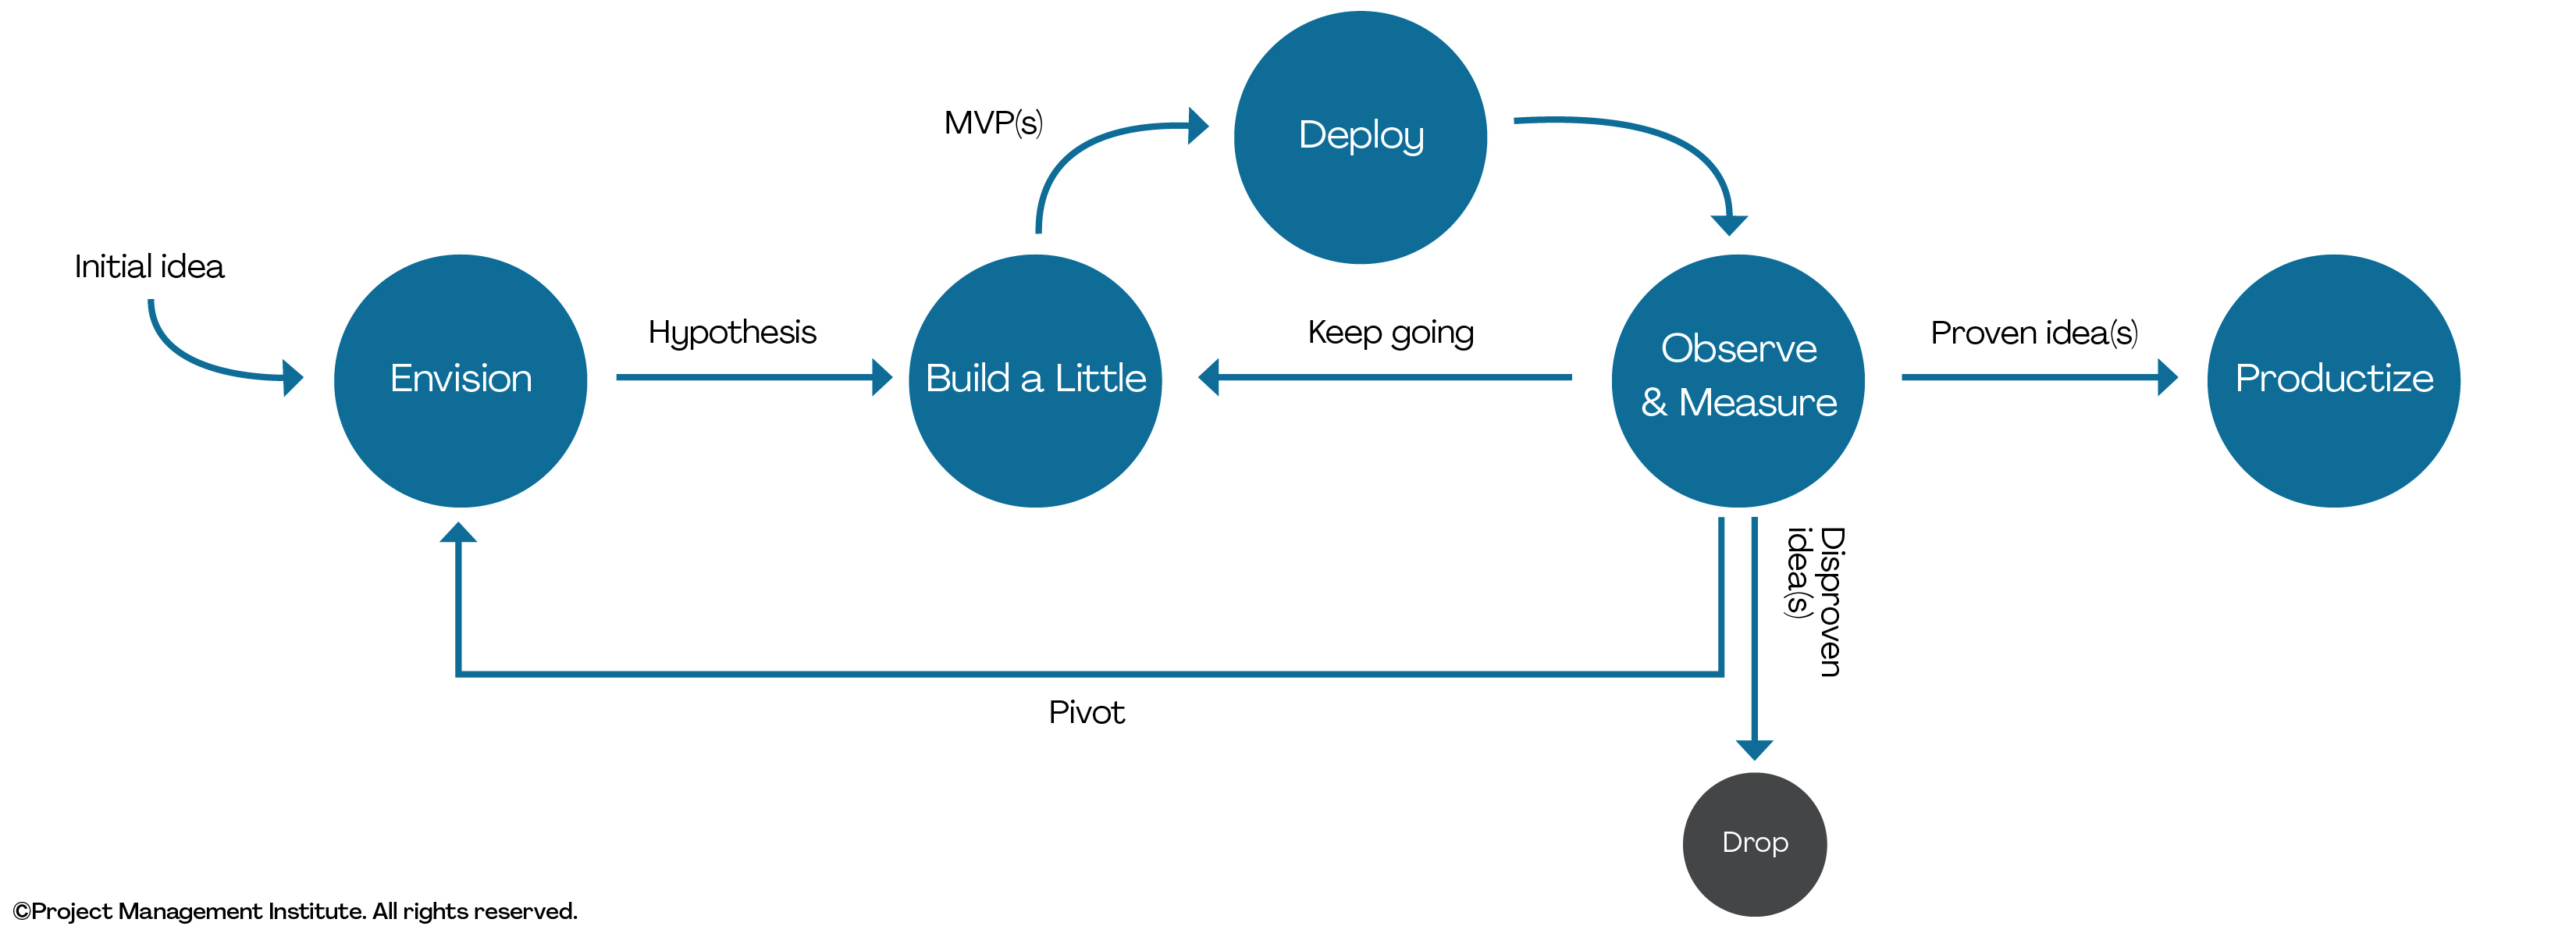 Exploratory Lifecycle - Lean Startup